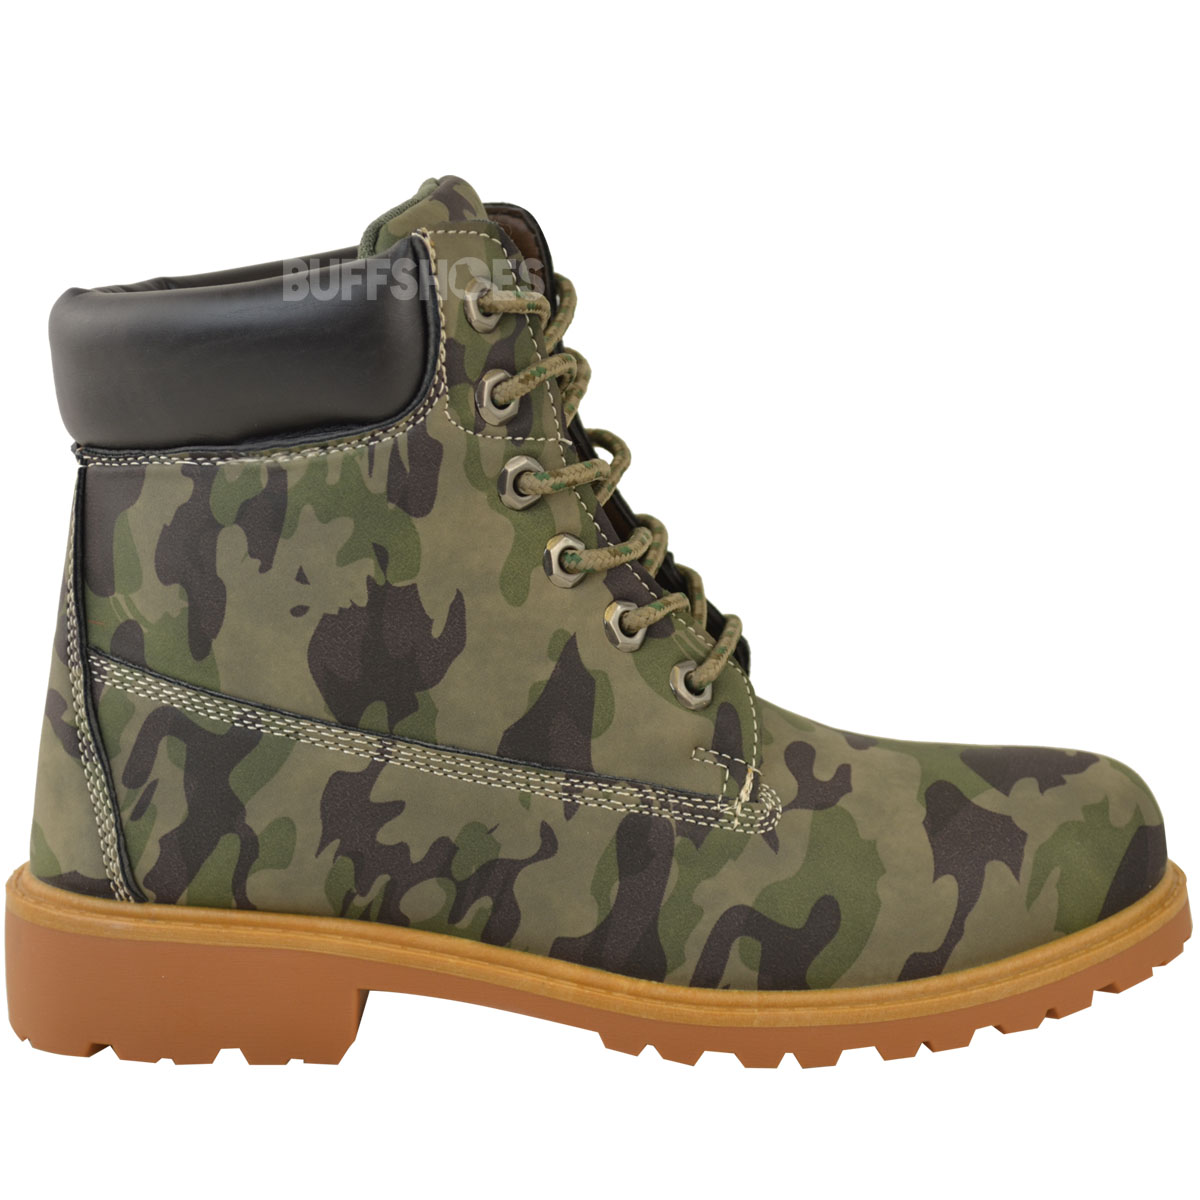 Womens Ladies Combat Army Boots Military Grip Hiking Walking Lace Up ...